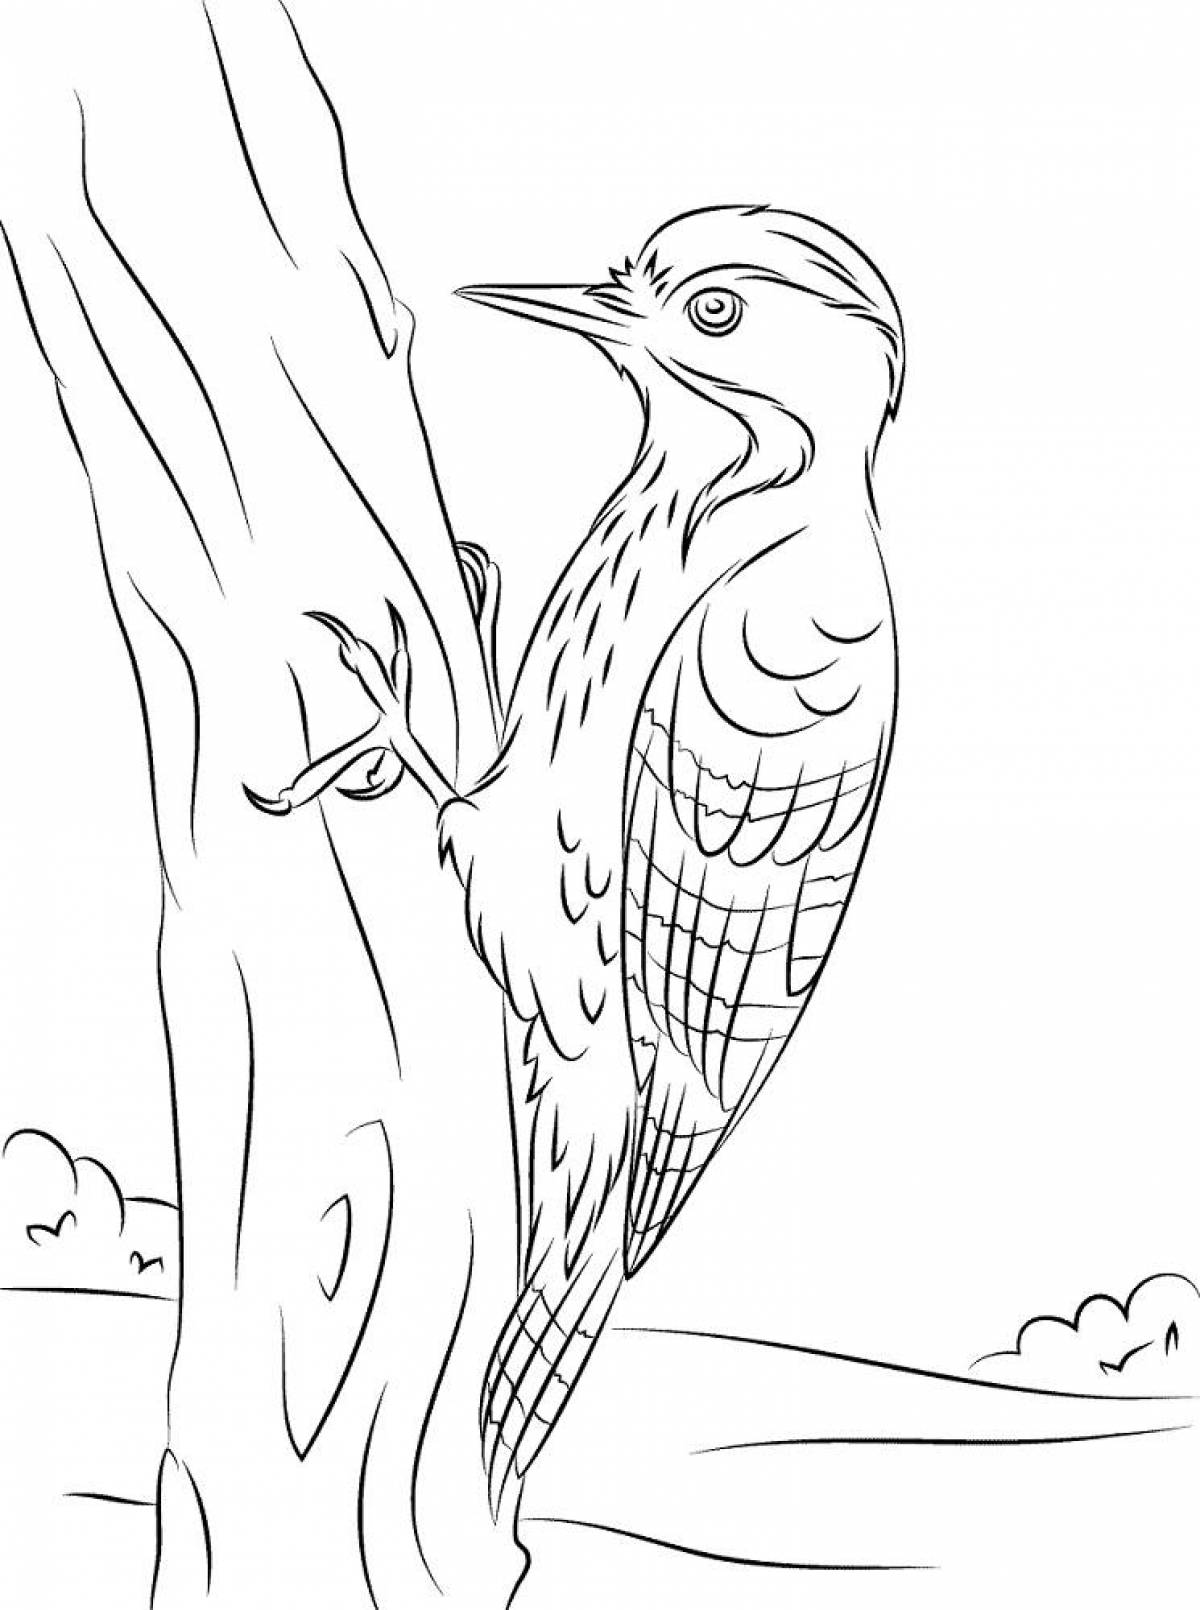 Cute woodpecker coloring pages for kids